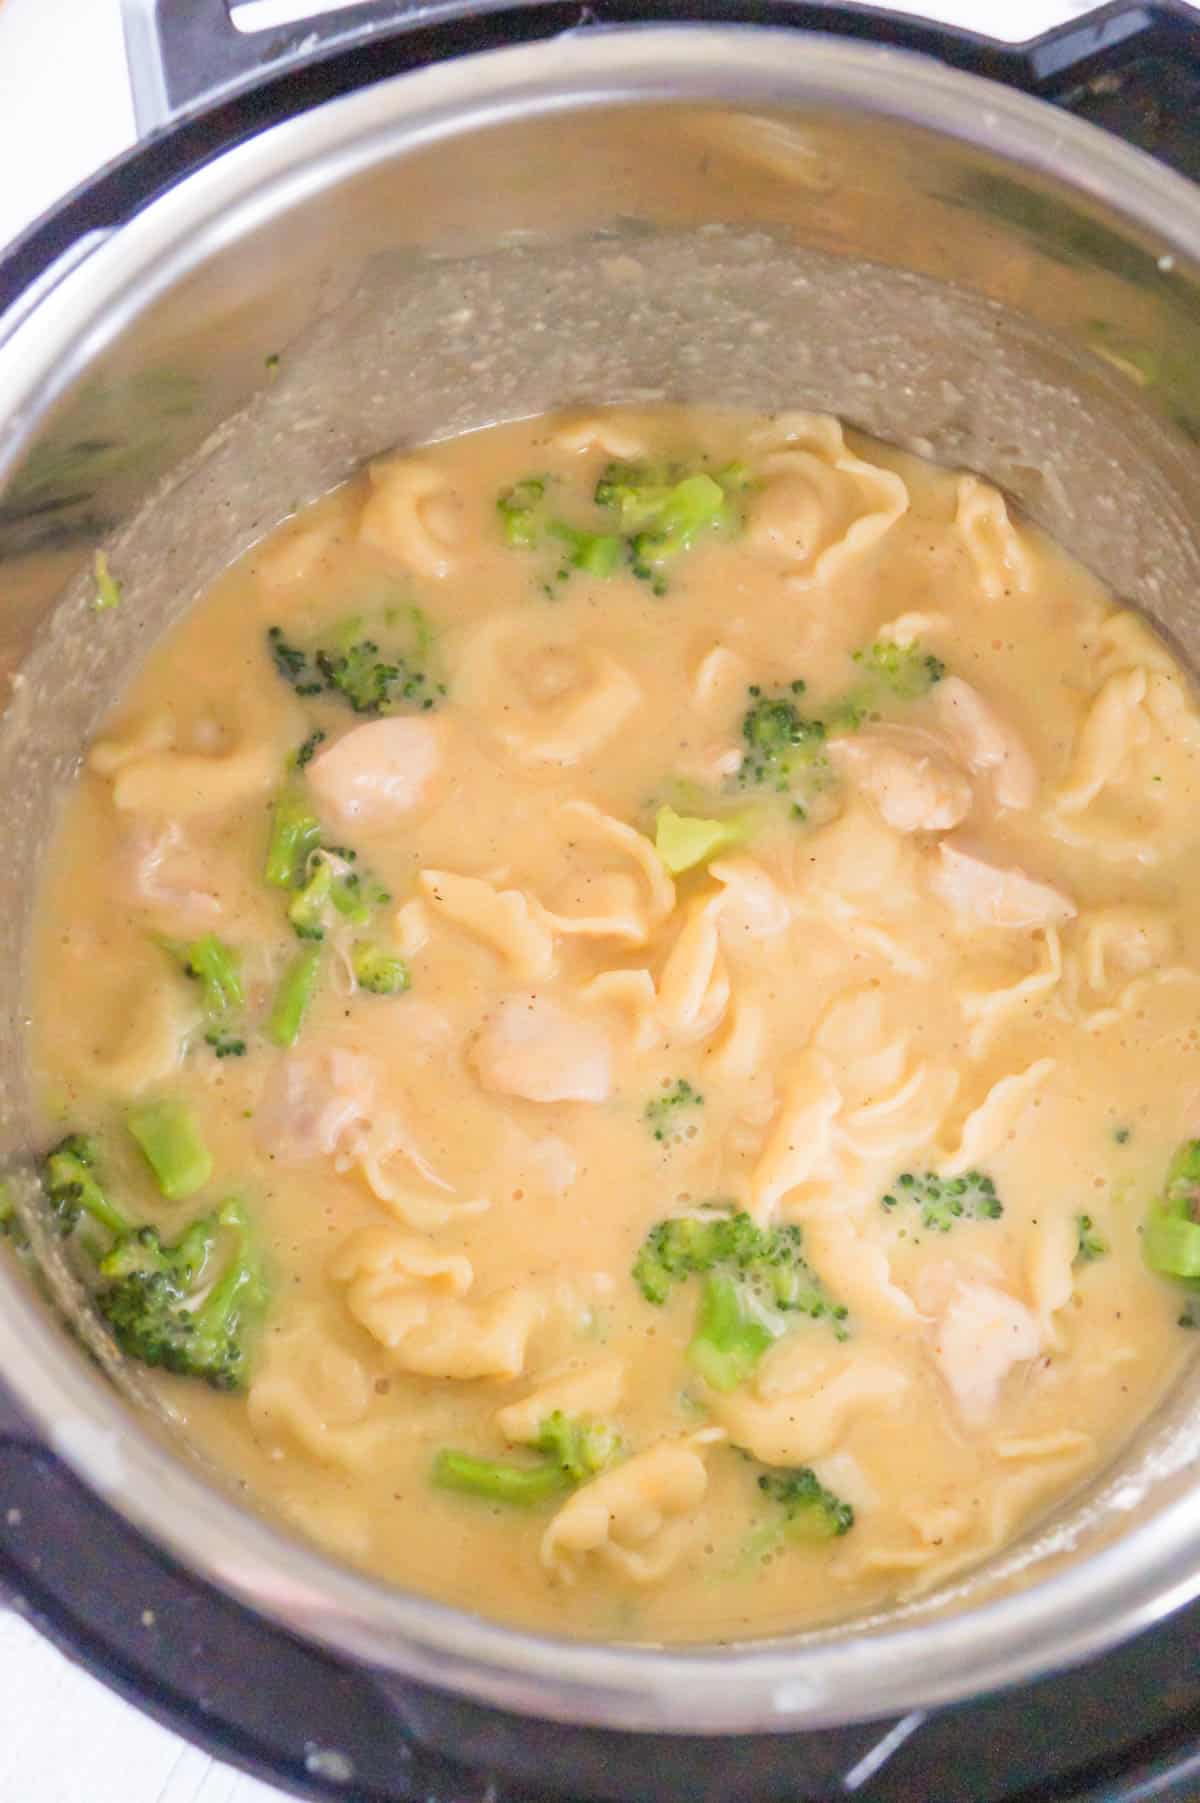 Instant Pot Cheesy Tortellini with Chicken and Broccoli is a delicious pressure cooker pasta recipe loaded with chunks of chicken breast and broccoli florets all tossed in a creamy cheese sauce.